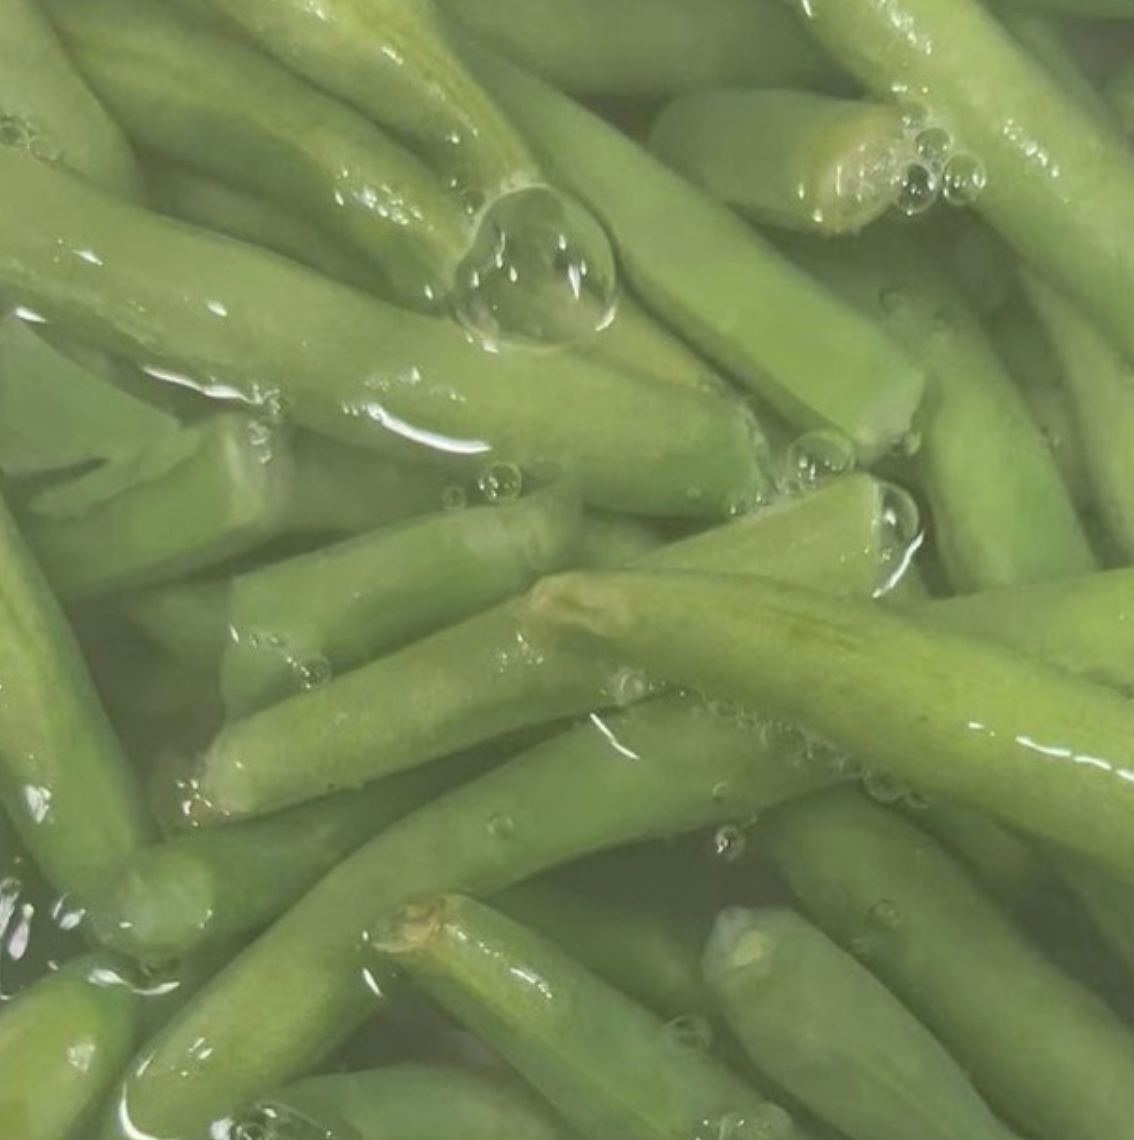 Blanch the green beans